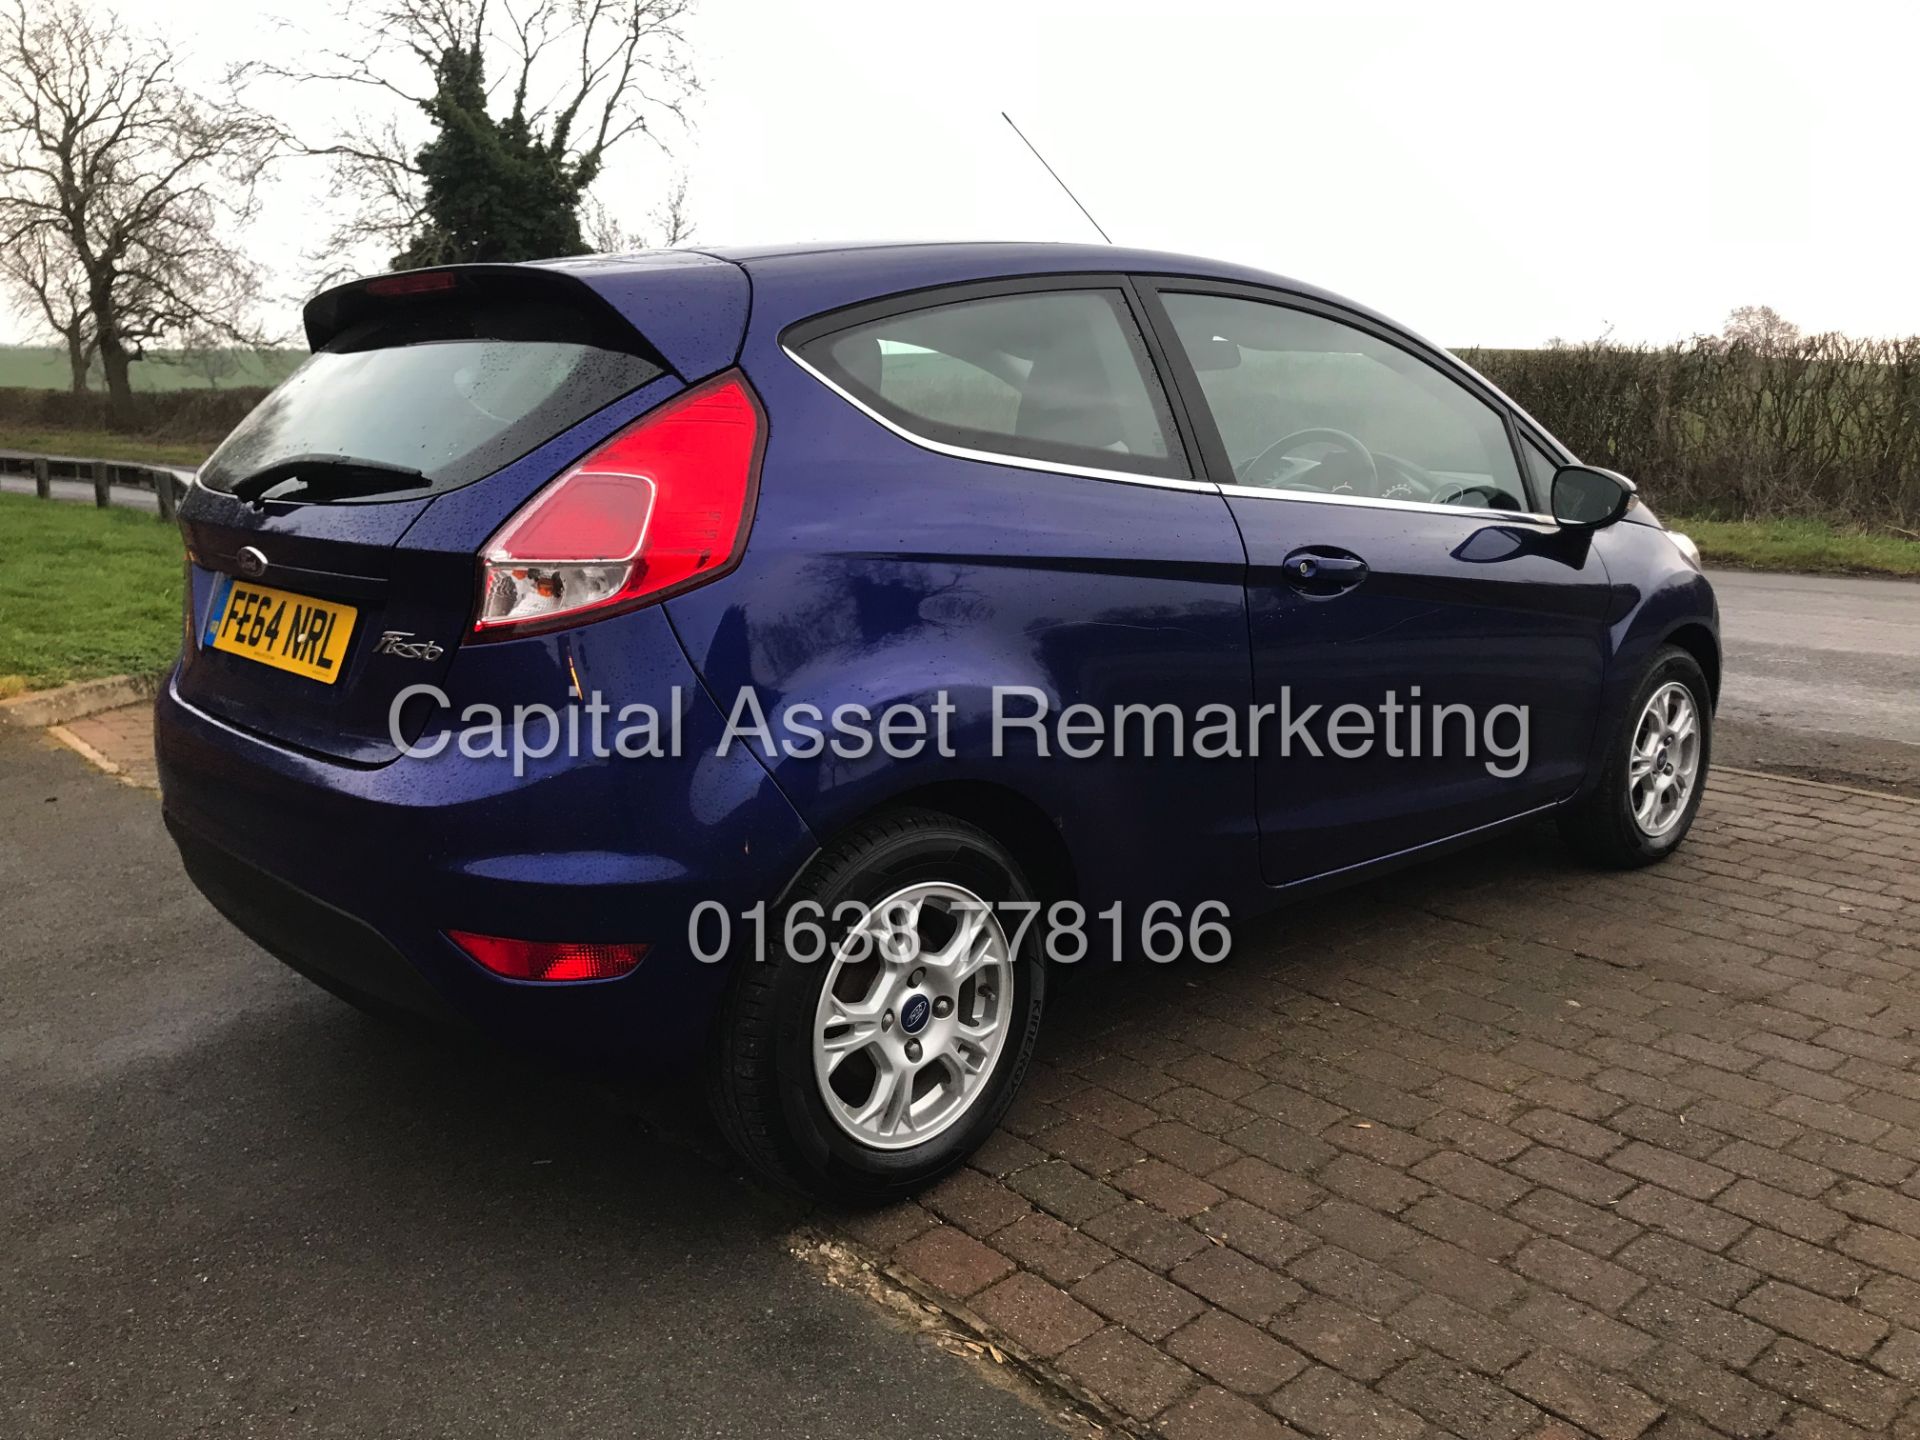 ON SALE FORD FIESTA 1.6TDCI "ZETEC ECONETIC" 1 OWNER FSH (2015 MODEL) ZERO £ ROAD TAX - AIR CON - Image 5 of 27